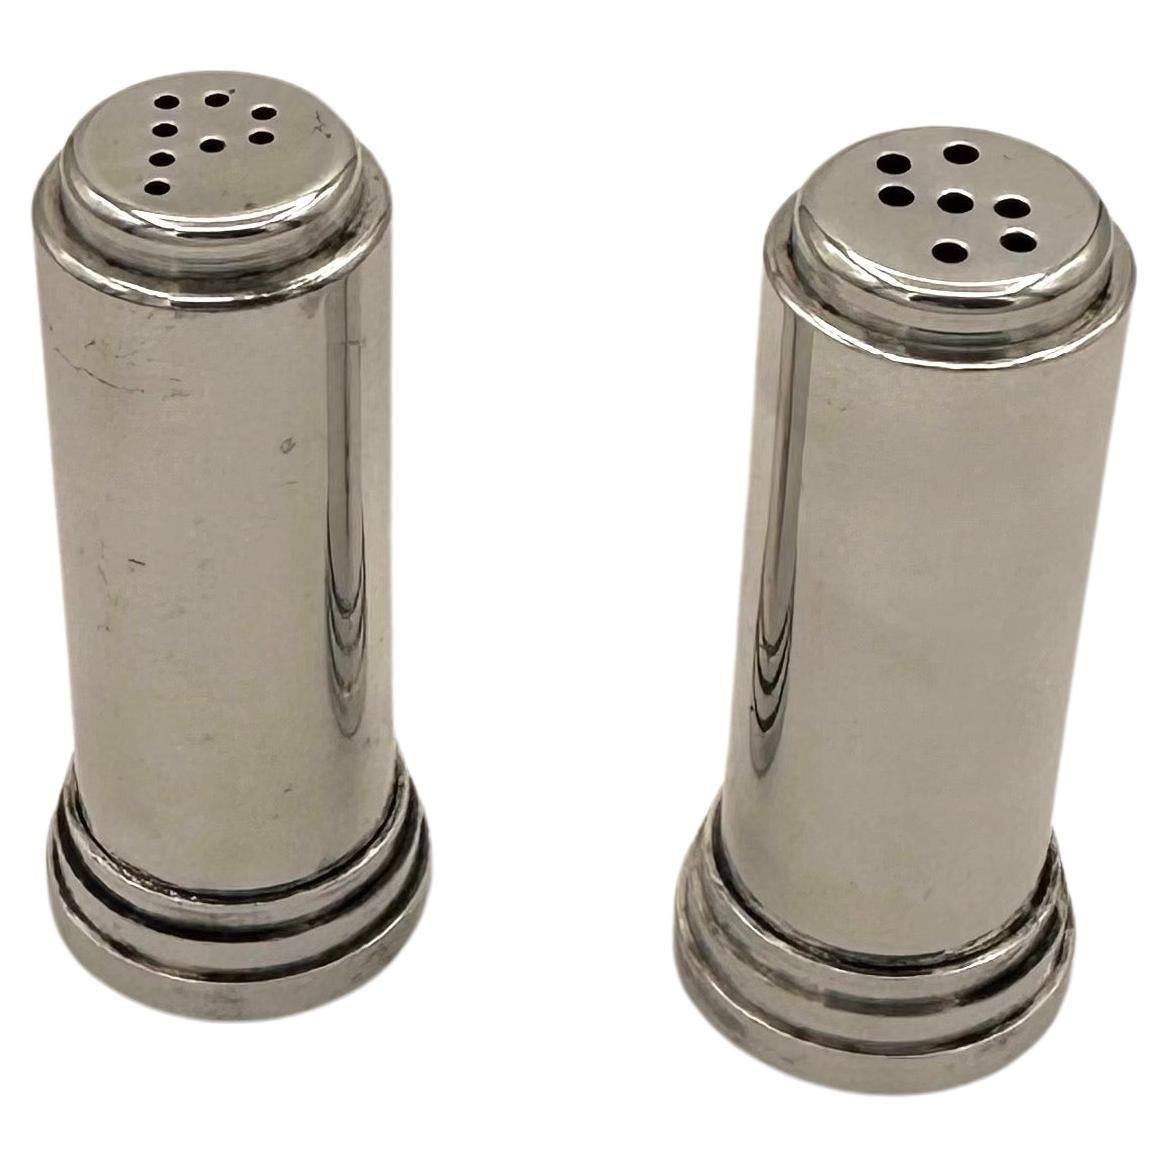 Vintage Pair of Small Art Deco Modernist Chrome Salt and Pepper Shakers